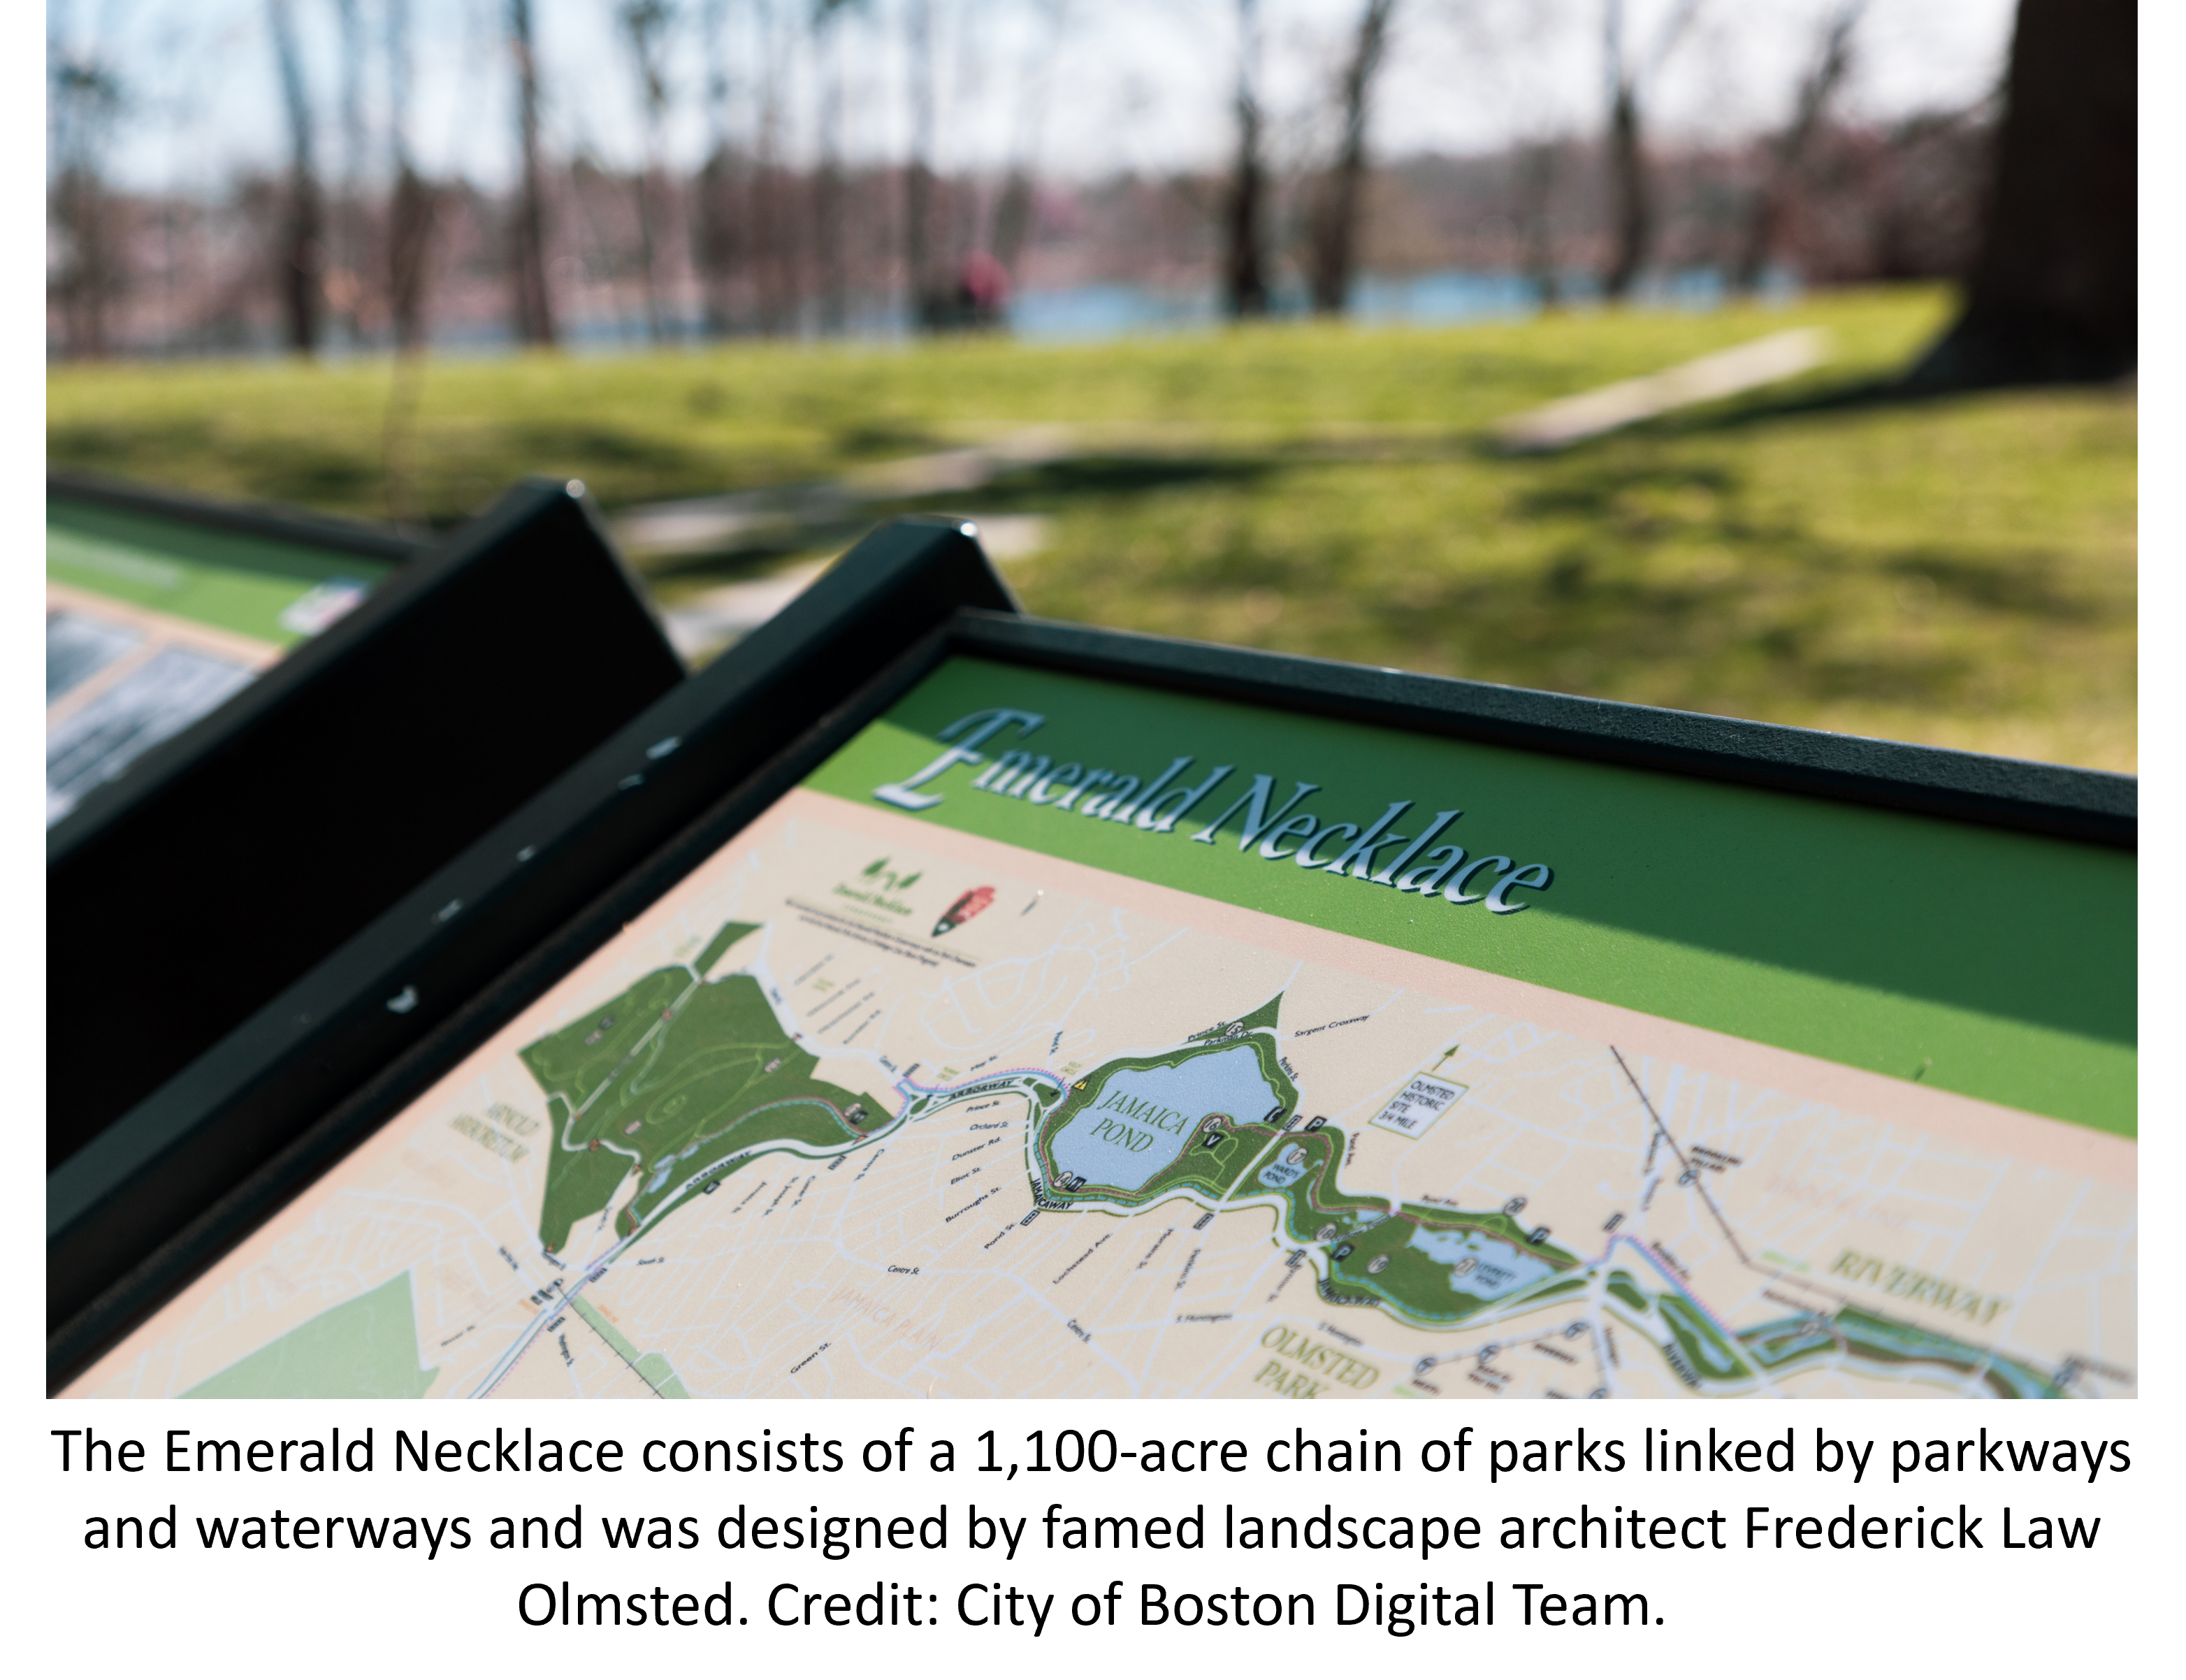 The Emerald Necklace consists of a 1,100-acre chain of parks linked by parkways and waterways and was designed by famed landscape architect Frederick Law Olmsted. Credit: City of Boston Digital Team.